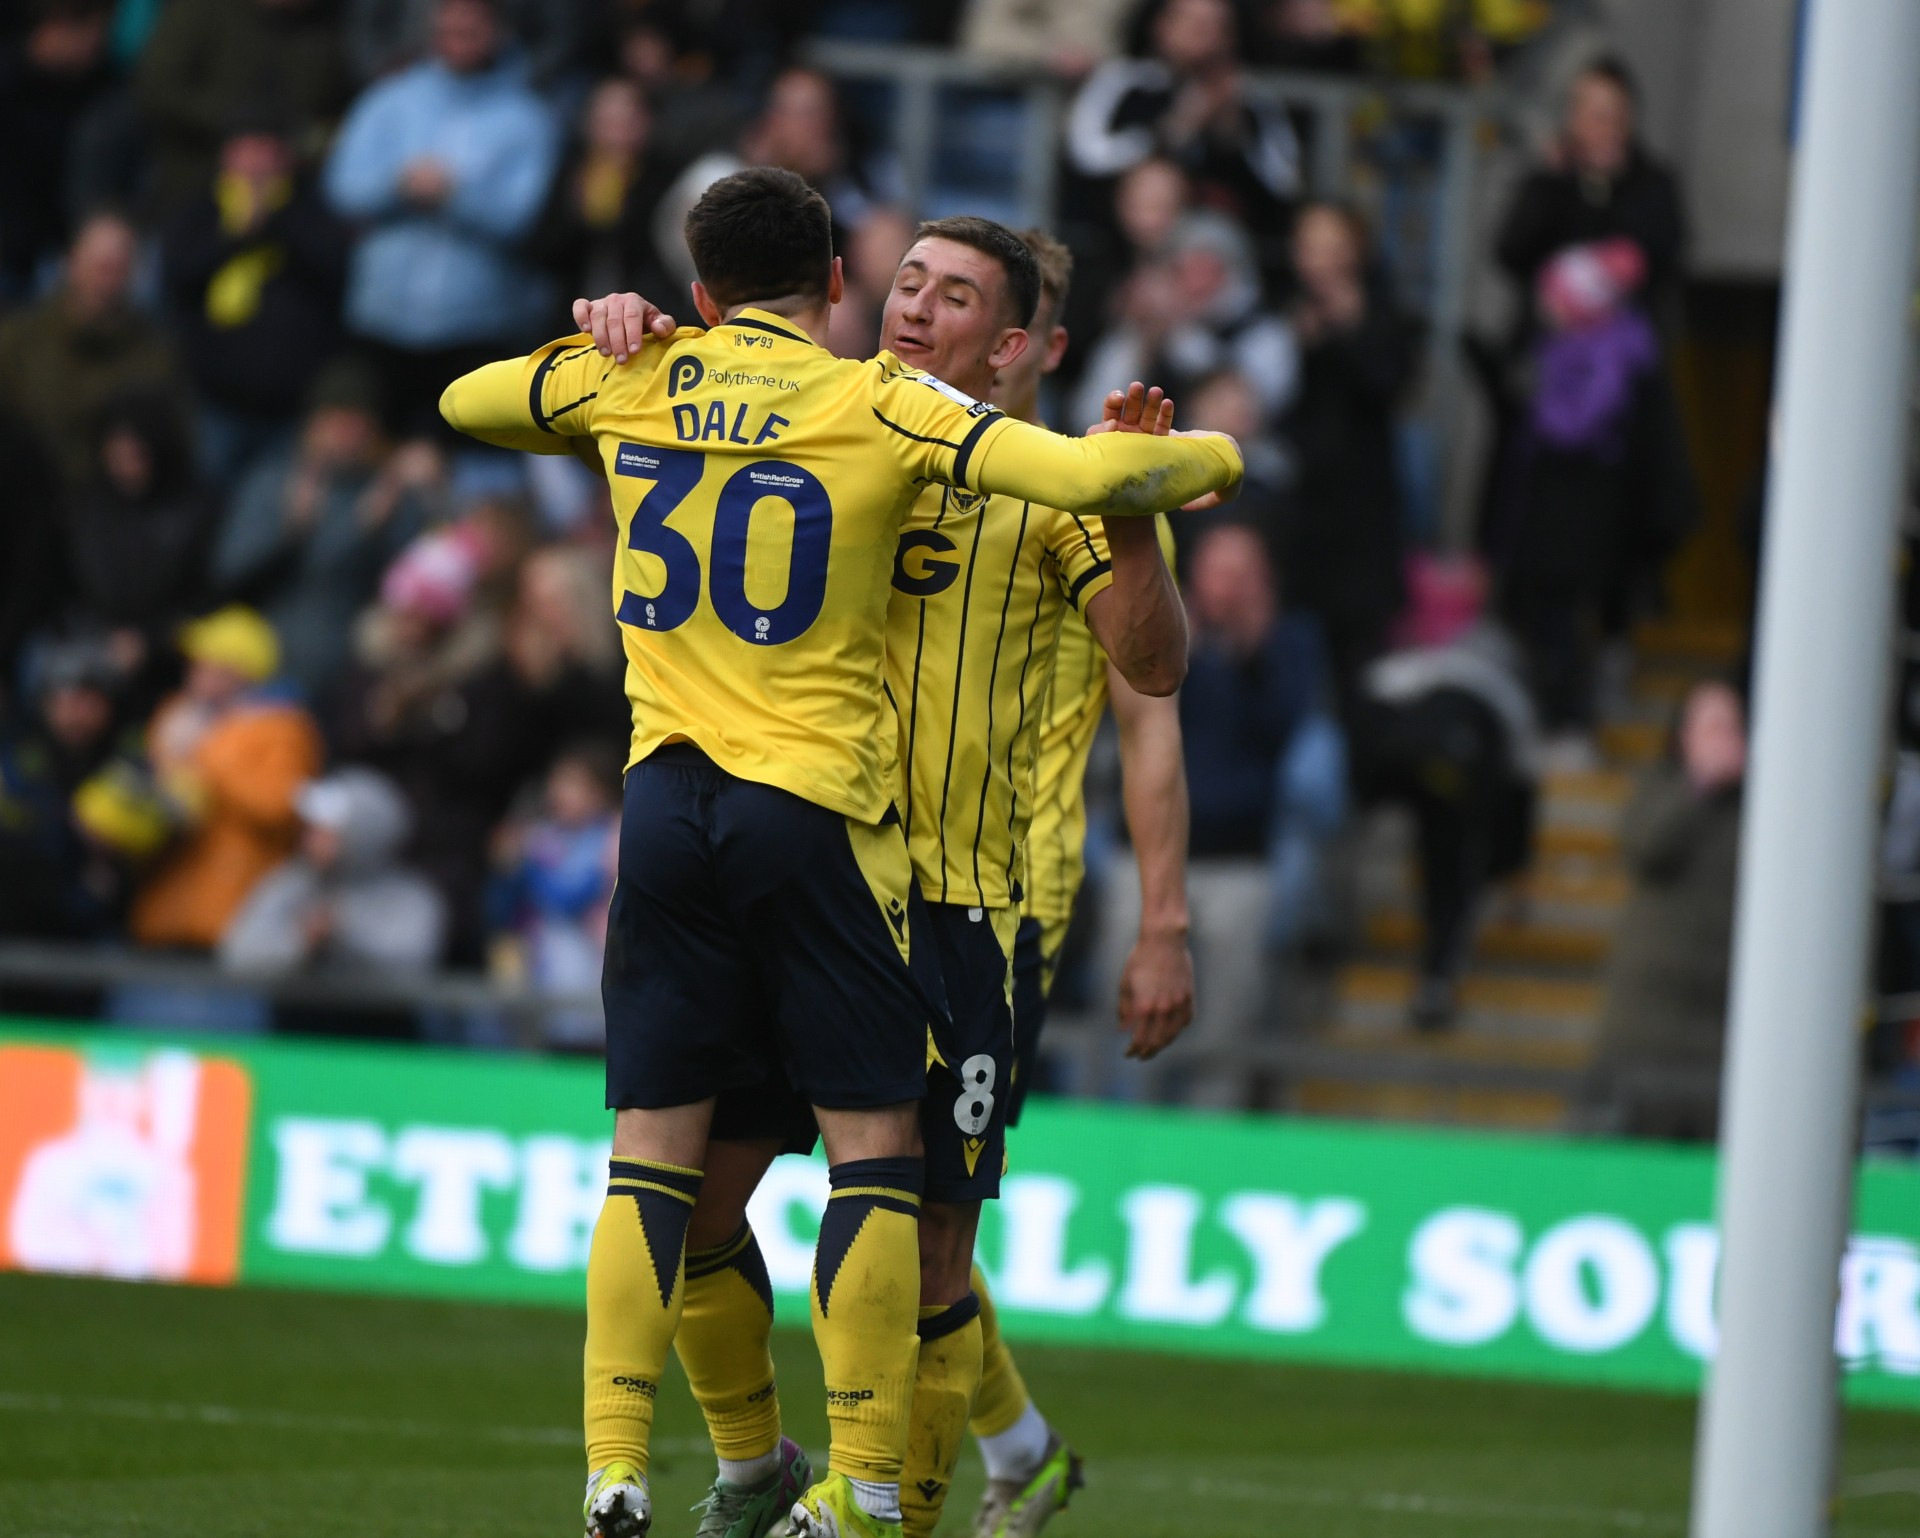 The Oxonian shares painful Oxford United play-off memory